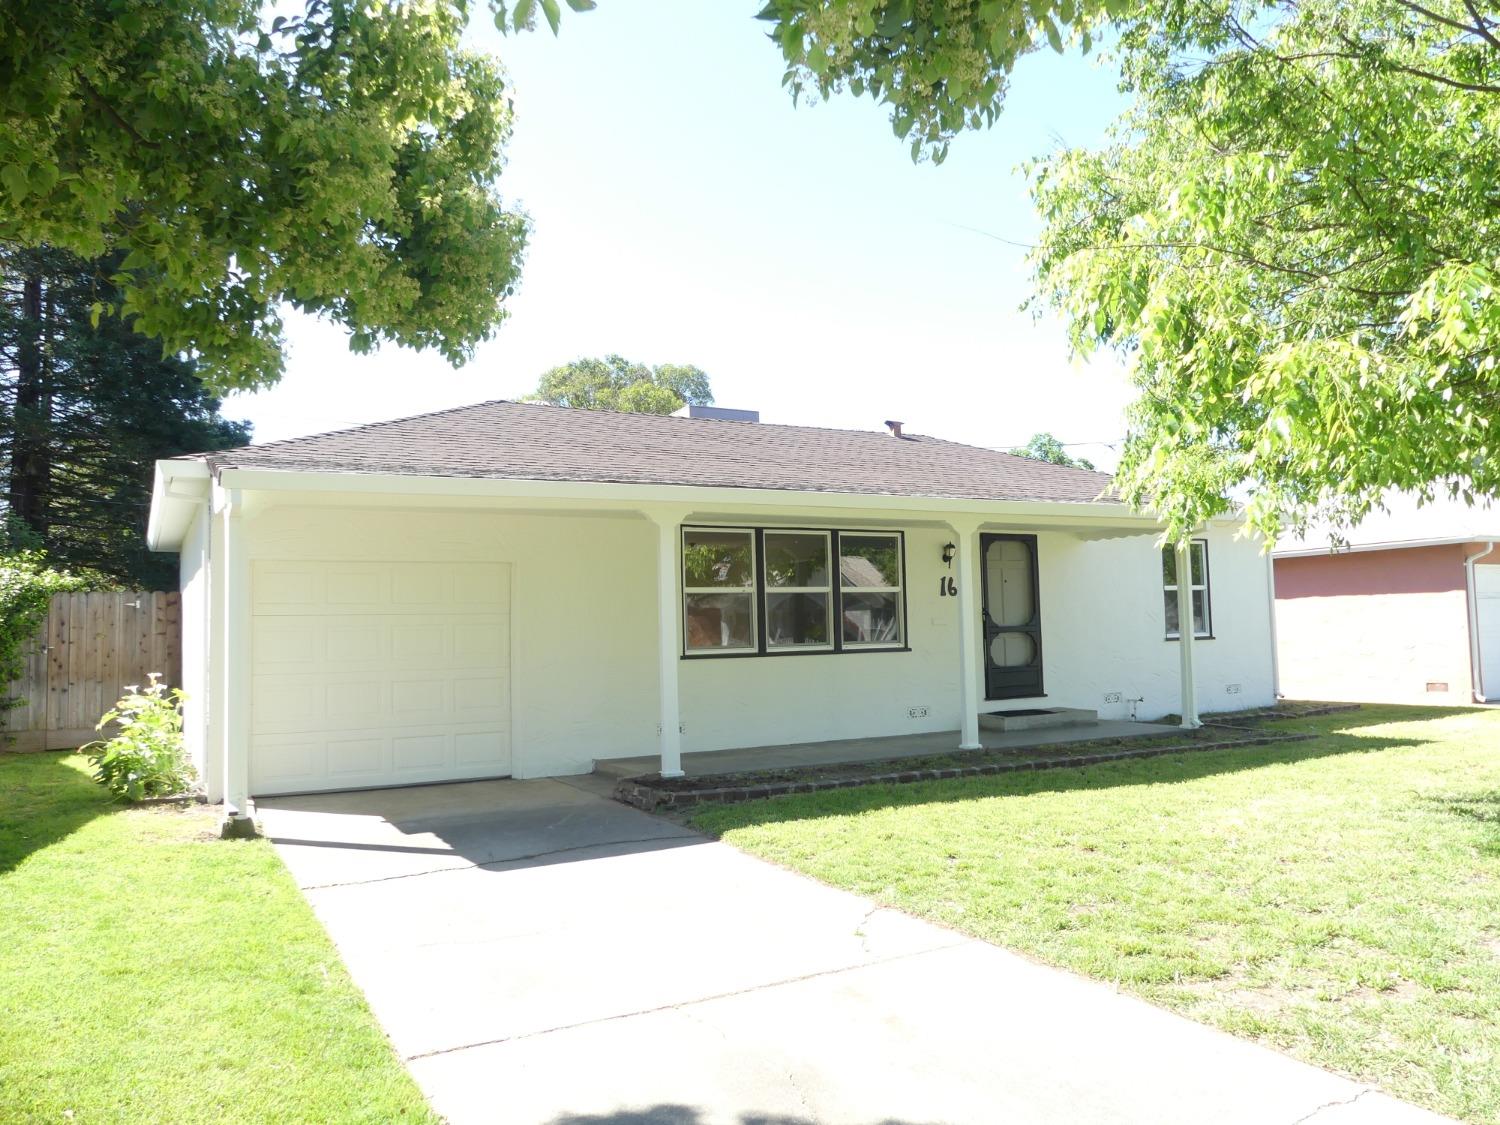 Photo of 16 W Barrymore St in Stockton, CA